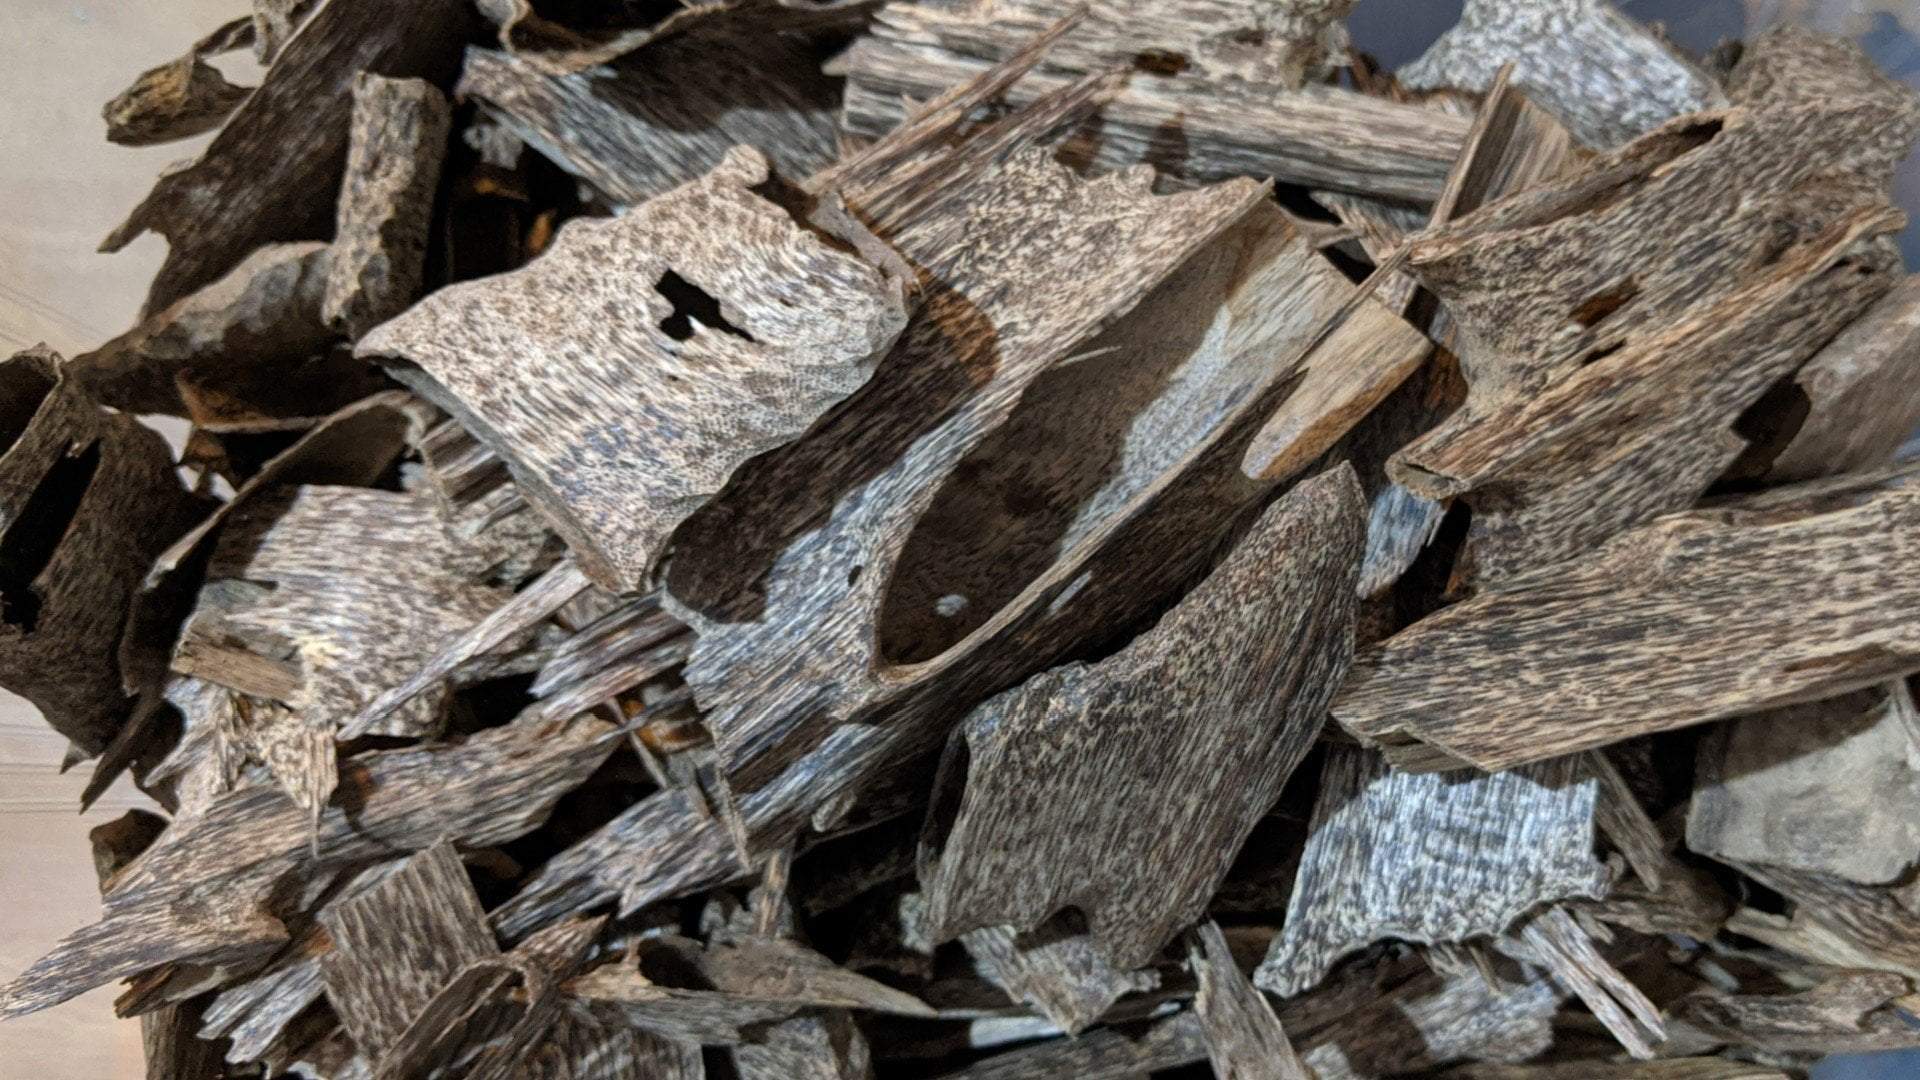 If You Are Novice And Do Not Know Much About Agarwood, You Should Get Good Counsel And Purchase From A Respected And Expert Business In The Sector